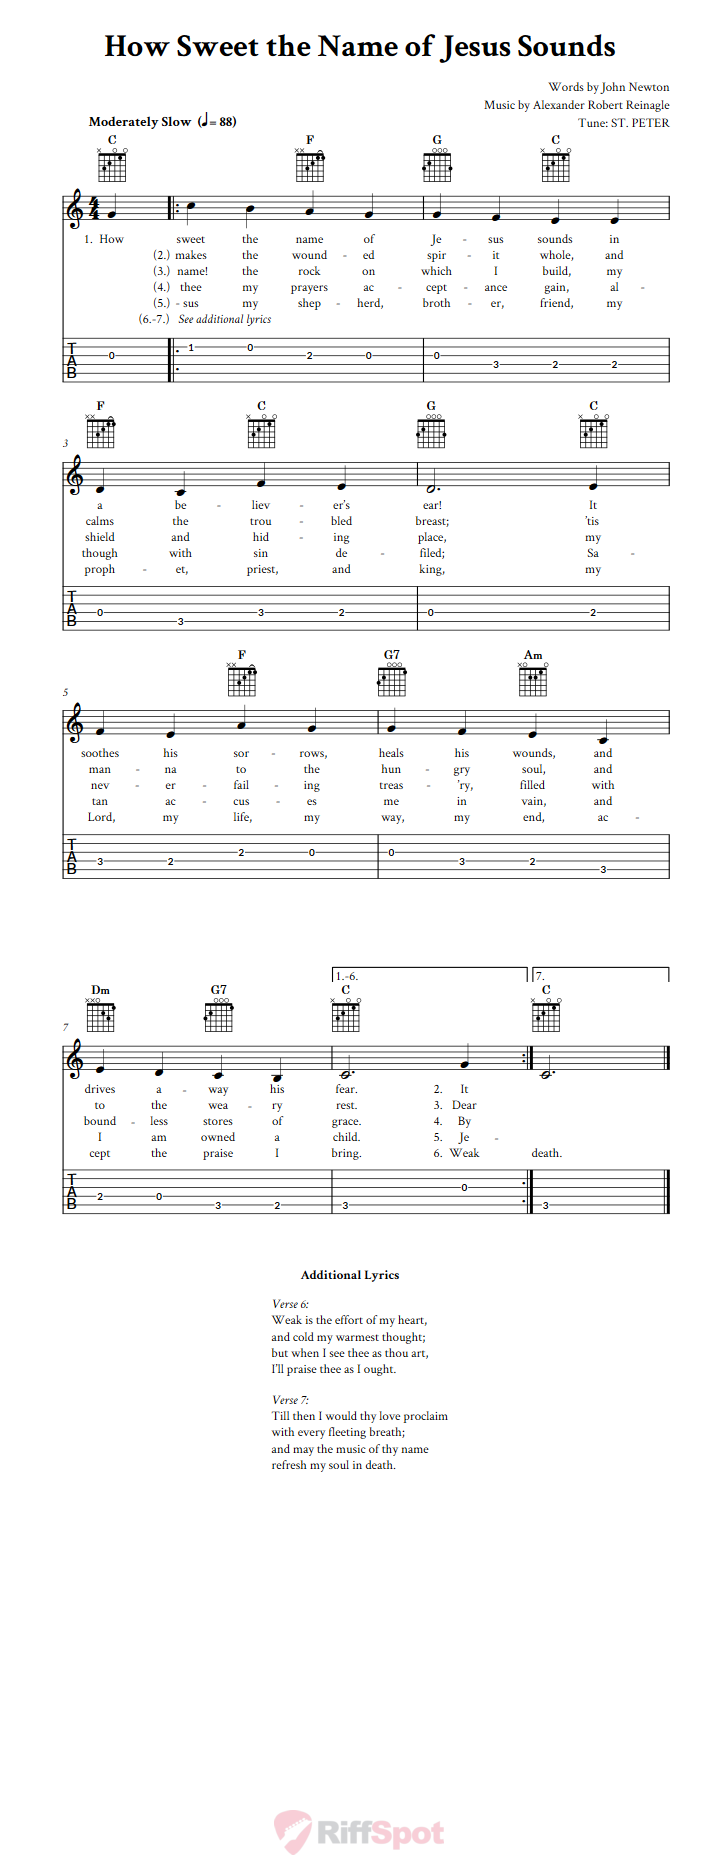 How Sweet the Name of Jesus Sounds Guitar Tab